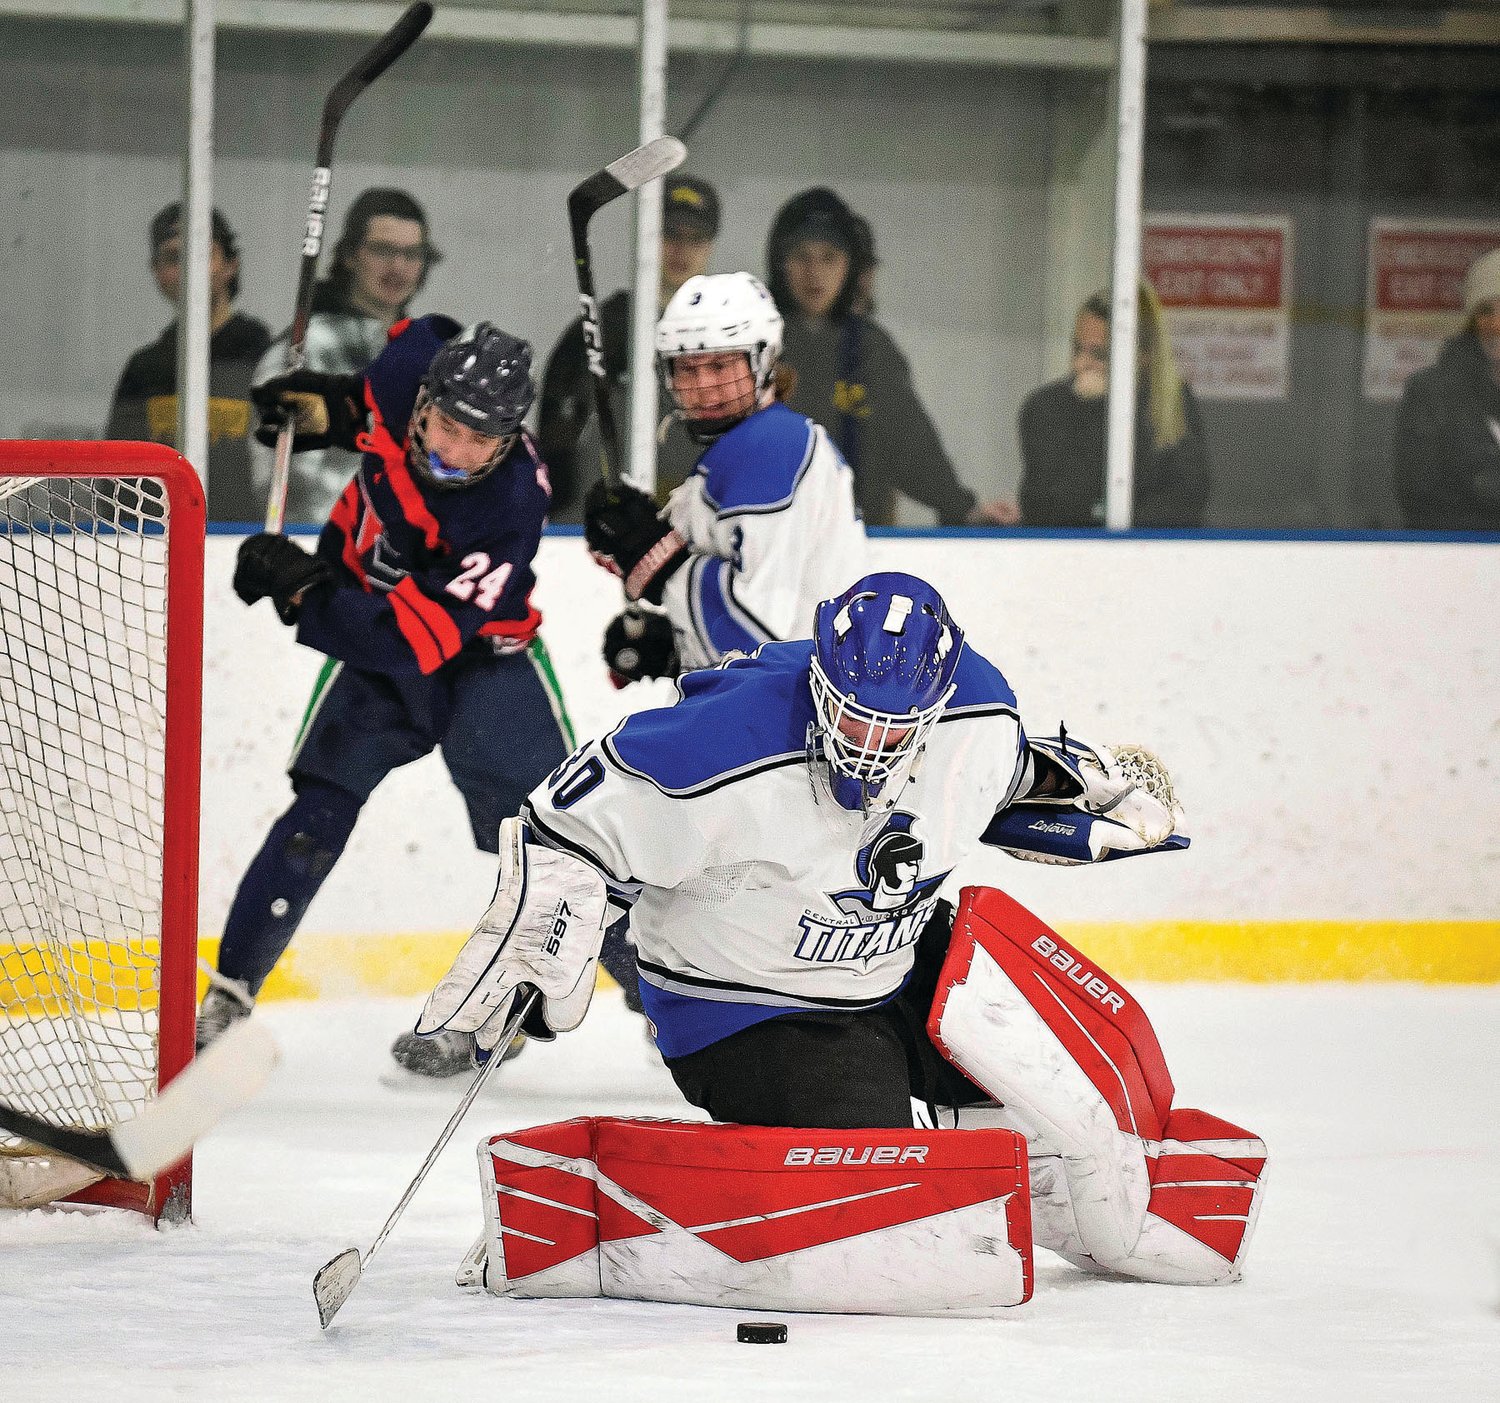 CB South’s Dominic Varacallo makes a save on a breakaway shot from CB East’s Stephen DiRugeris.